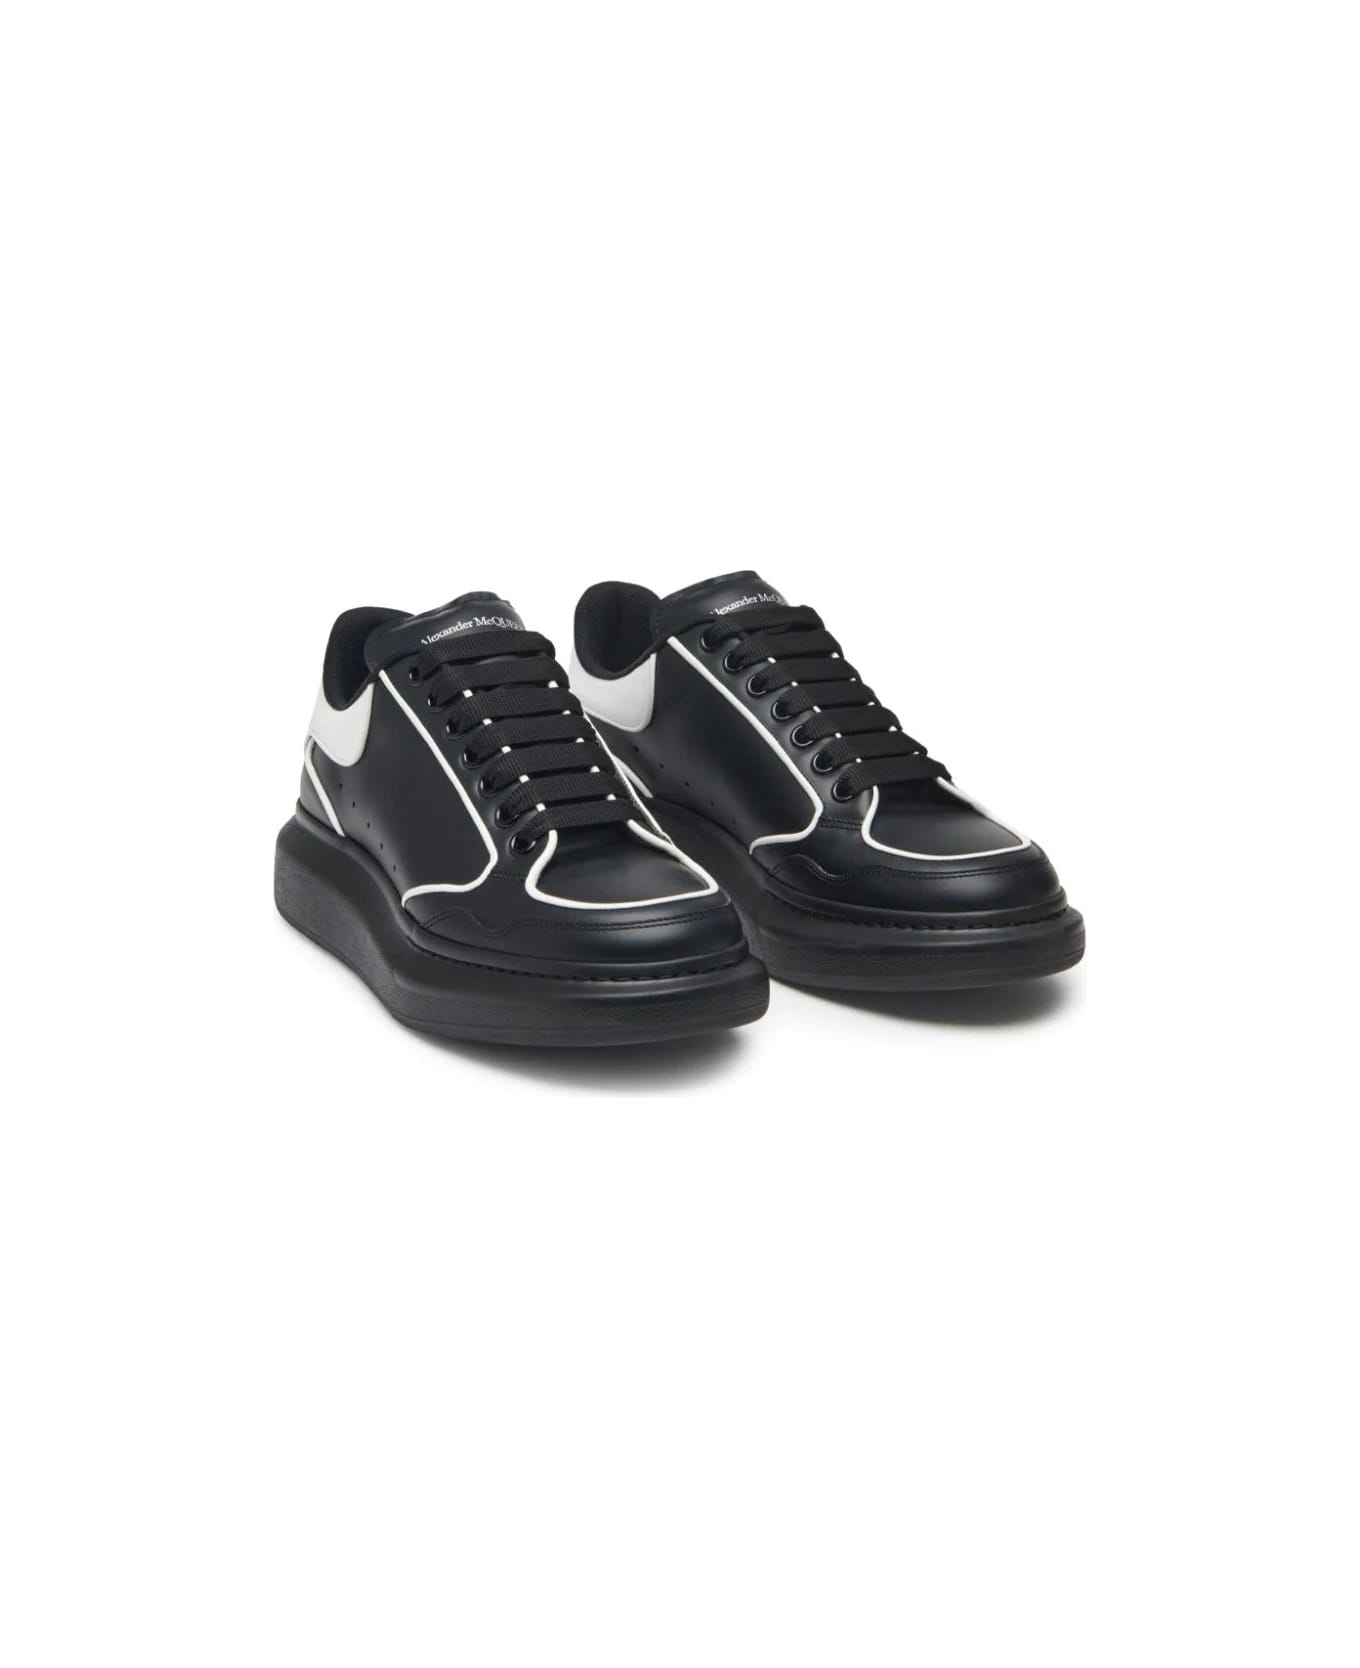 Alexander McQueen Oversized Sneakers In Black And White - Black